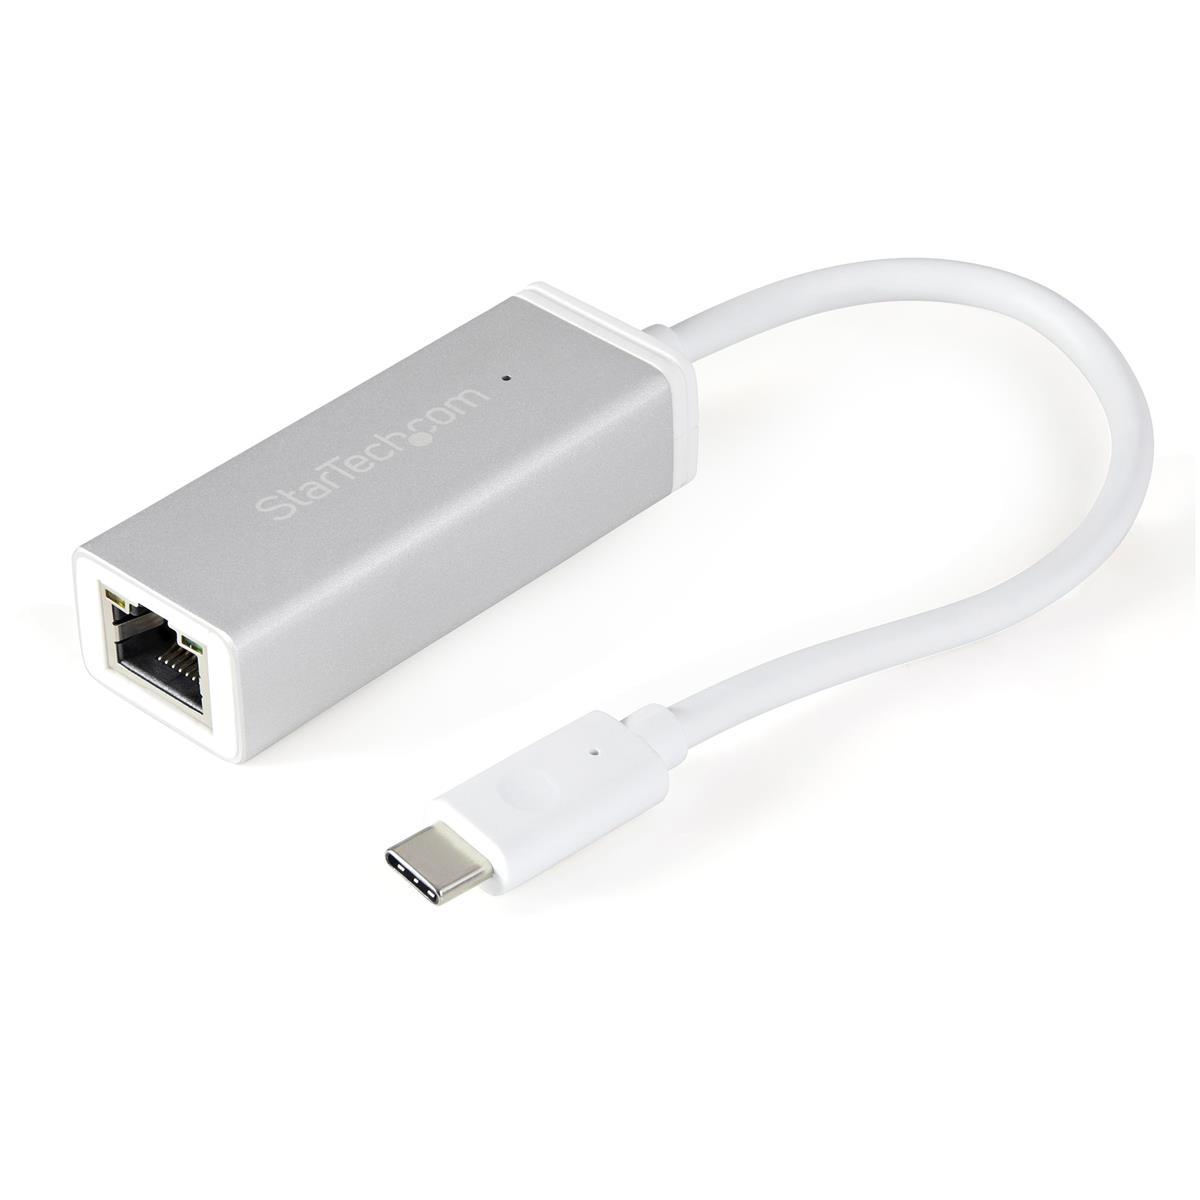 Image of StarTech Apple Style USB 3.0 Type C to Gigabit Ethernet Network Adapter